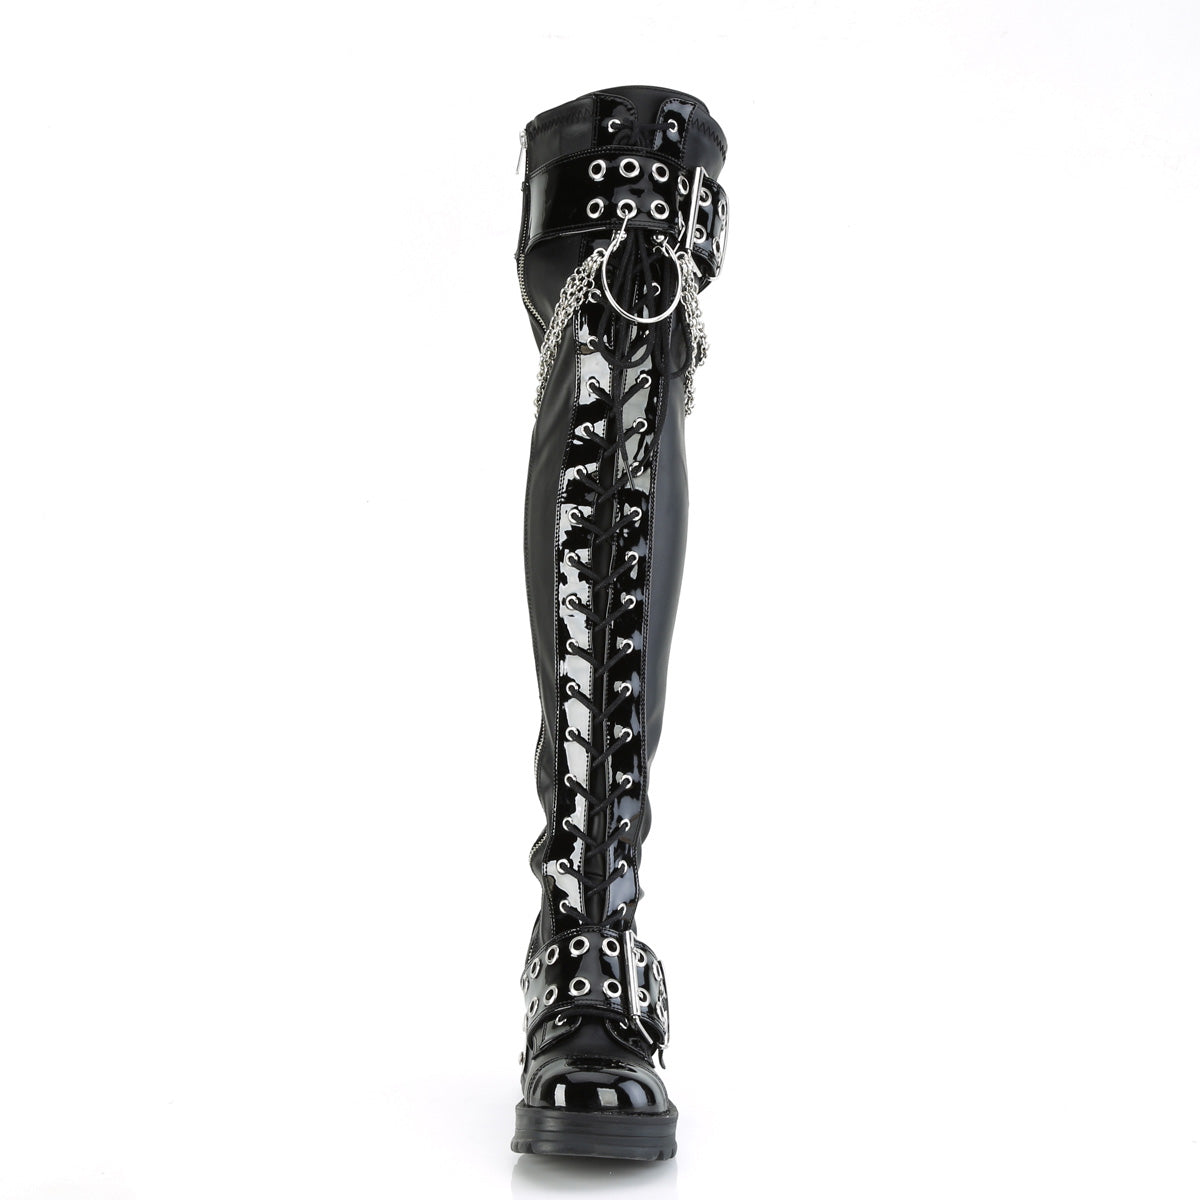 BRATTY-304 Demoniacult Alternative Footwear Lace Up Over-the-Knee Boots